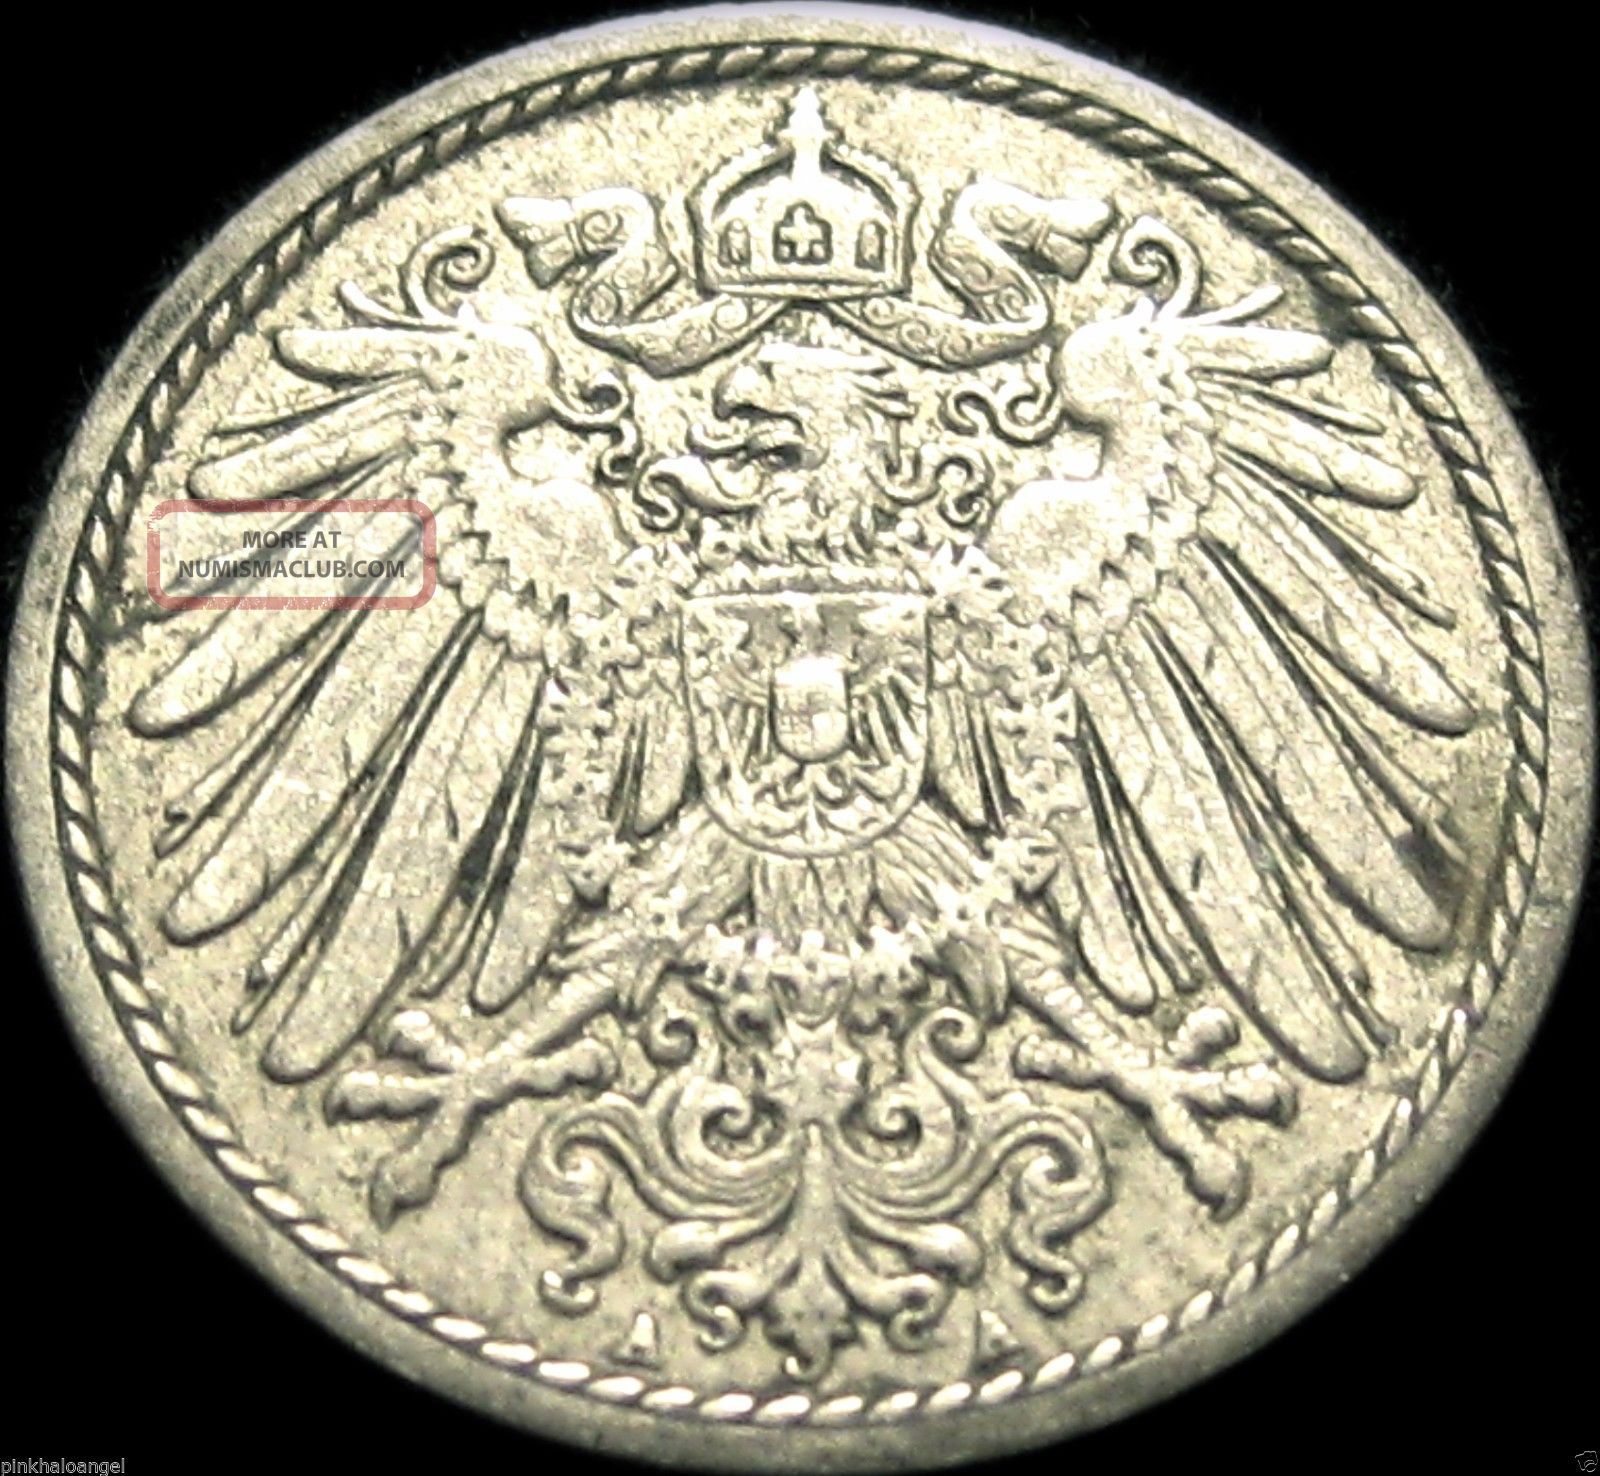 Germany - German Empire - German 1911a 5 Pfennig Coin - 103 Years Old